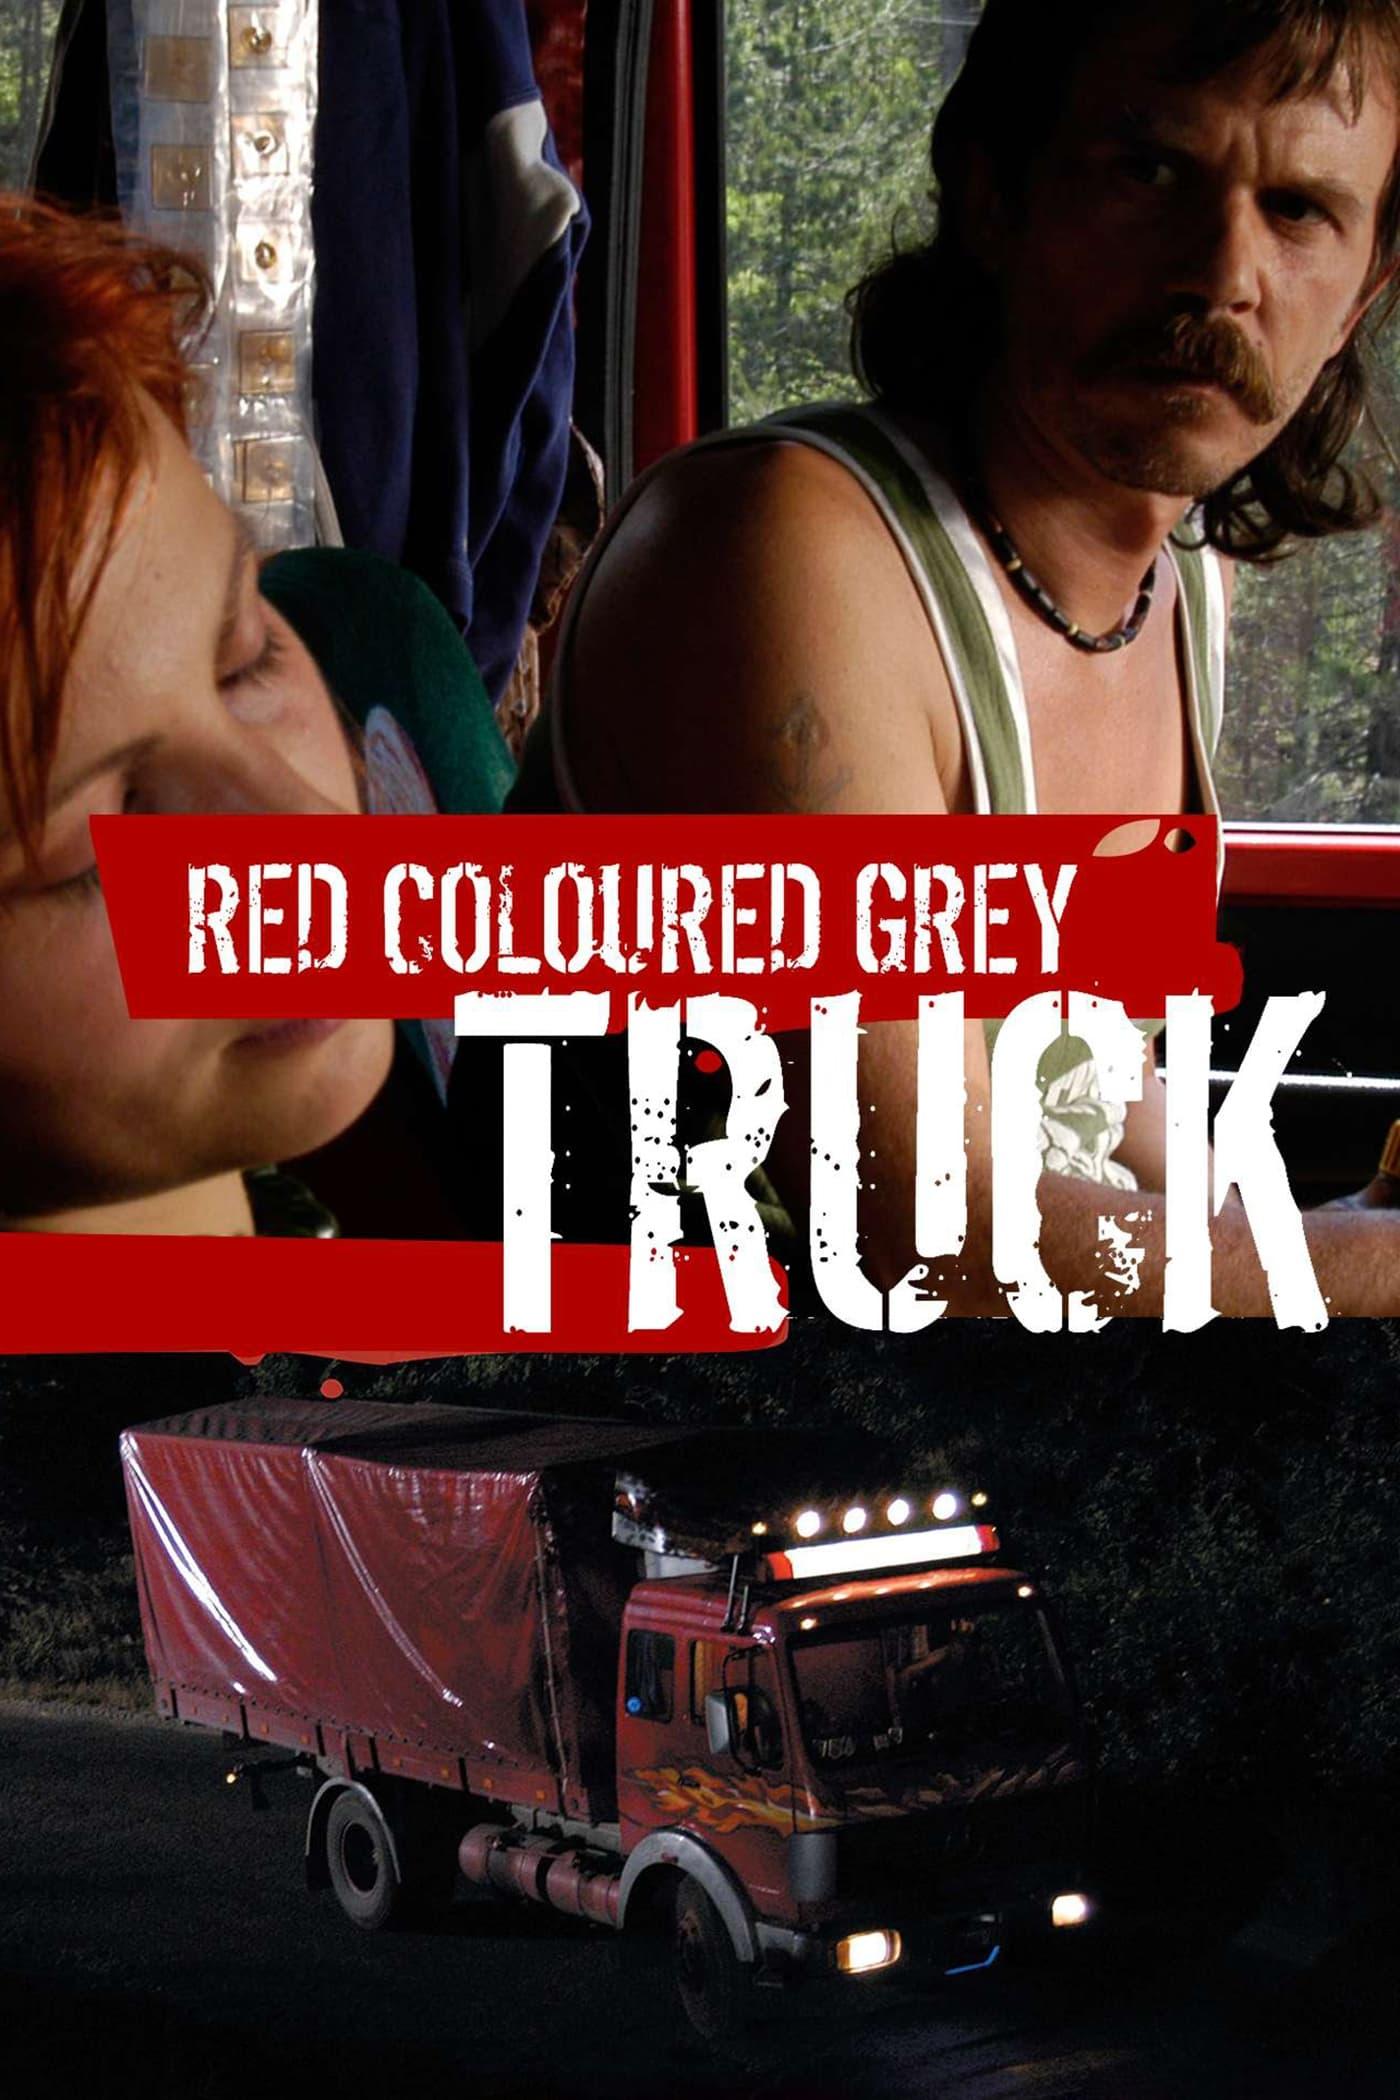 The Red Colored Grey Truck poster